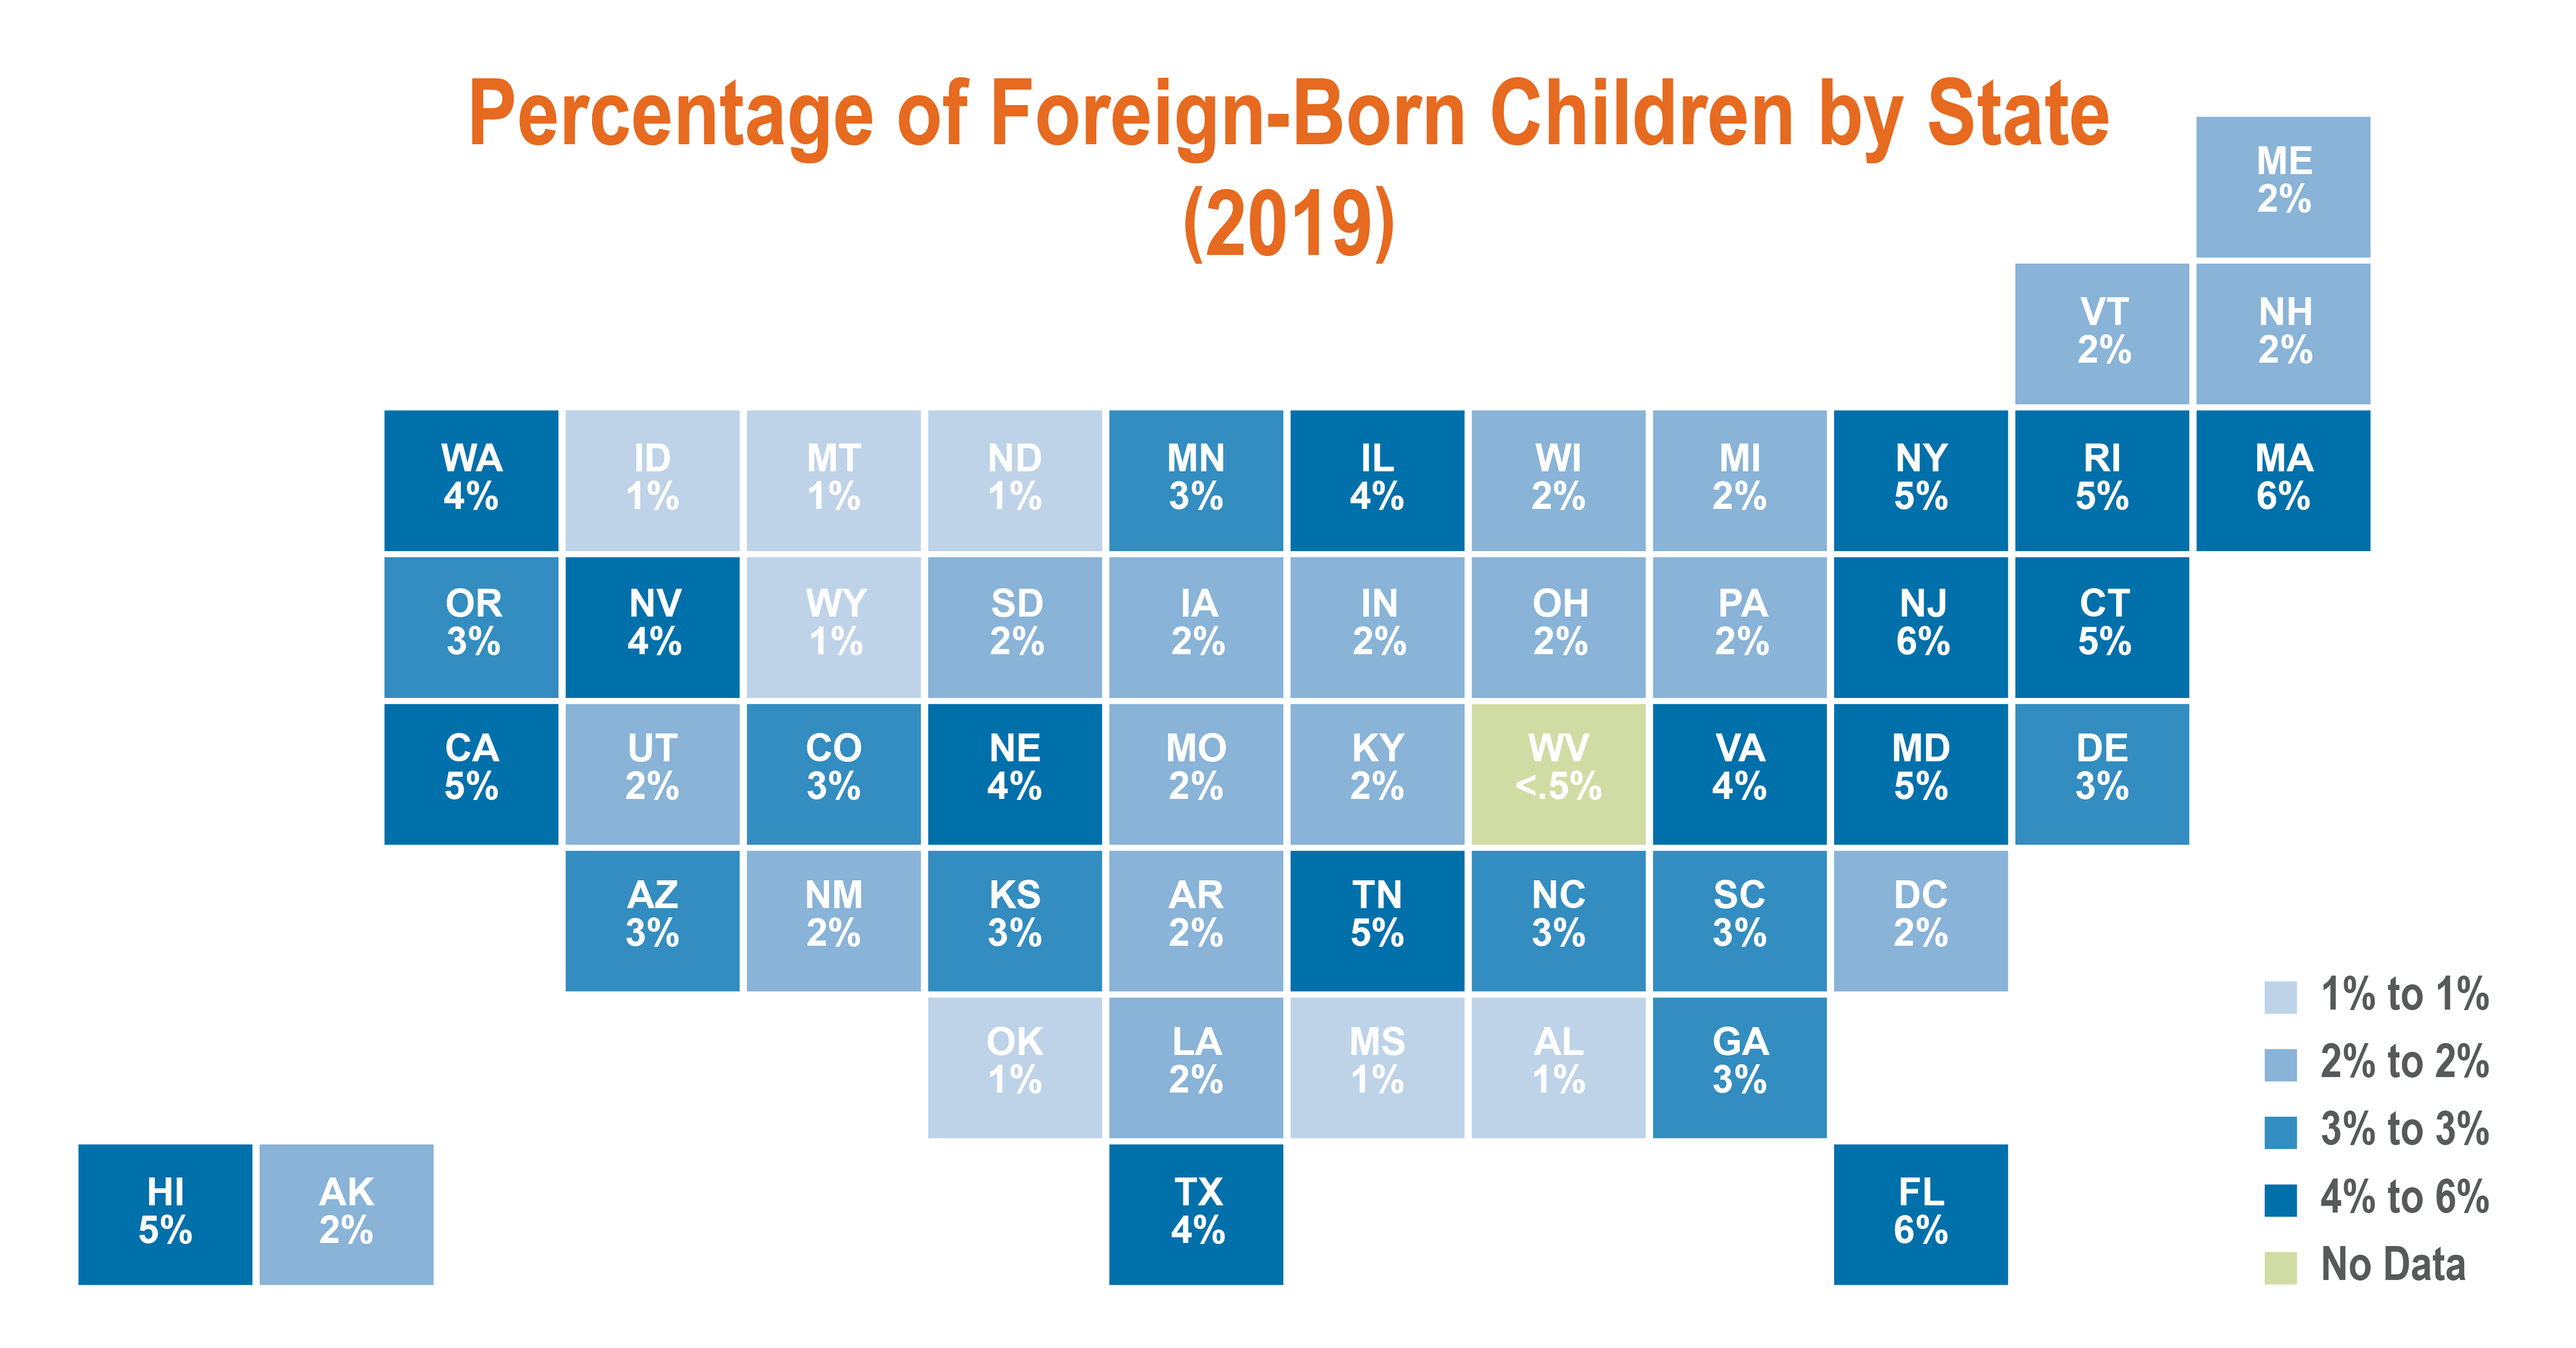 Percentage of Foreign-Born Children by State (2019)